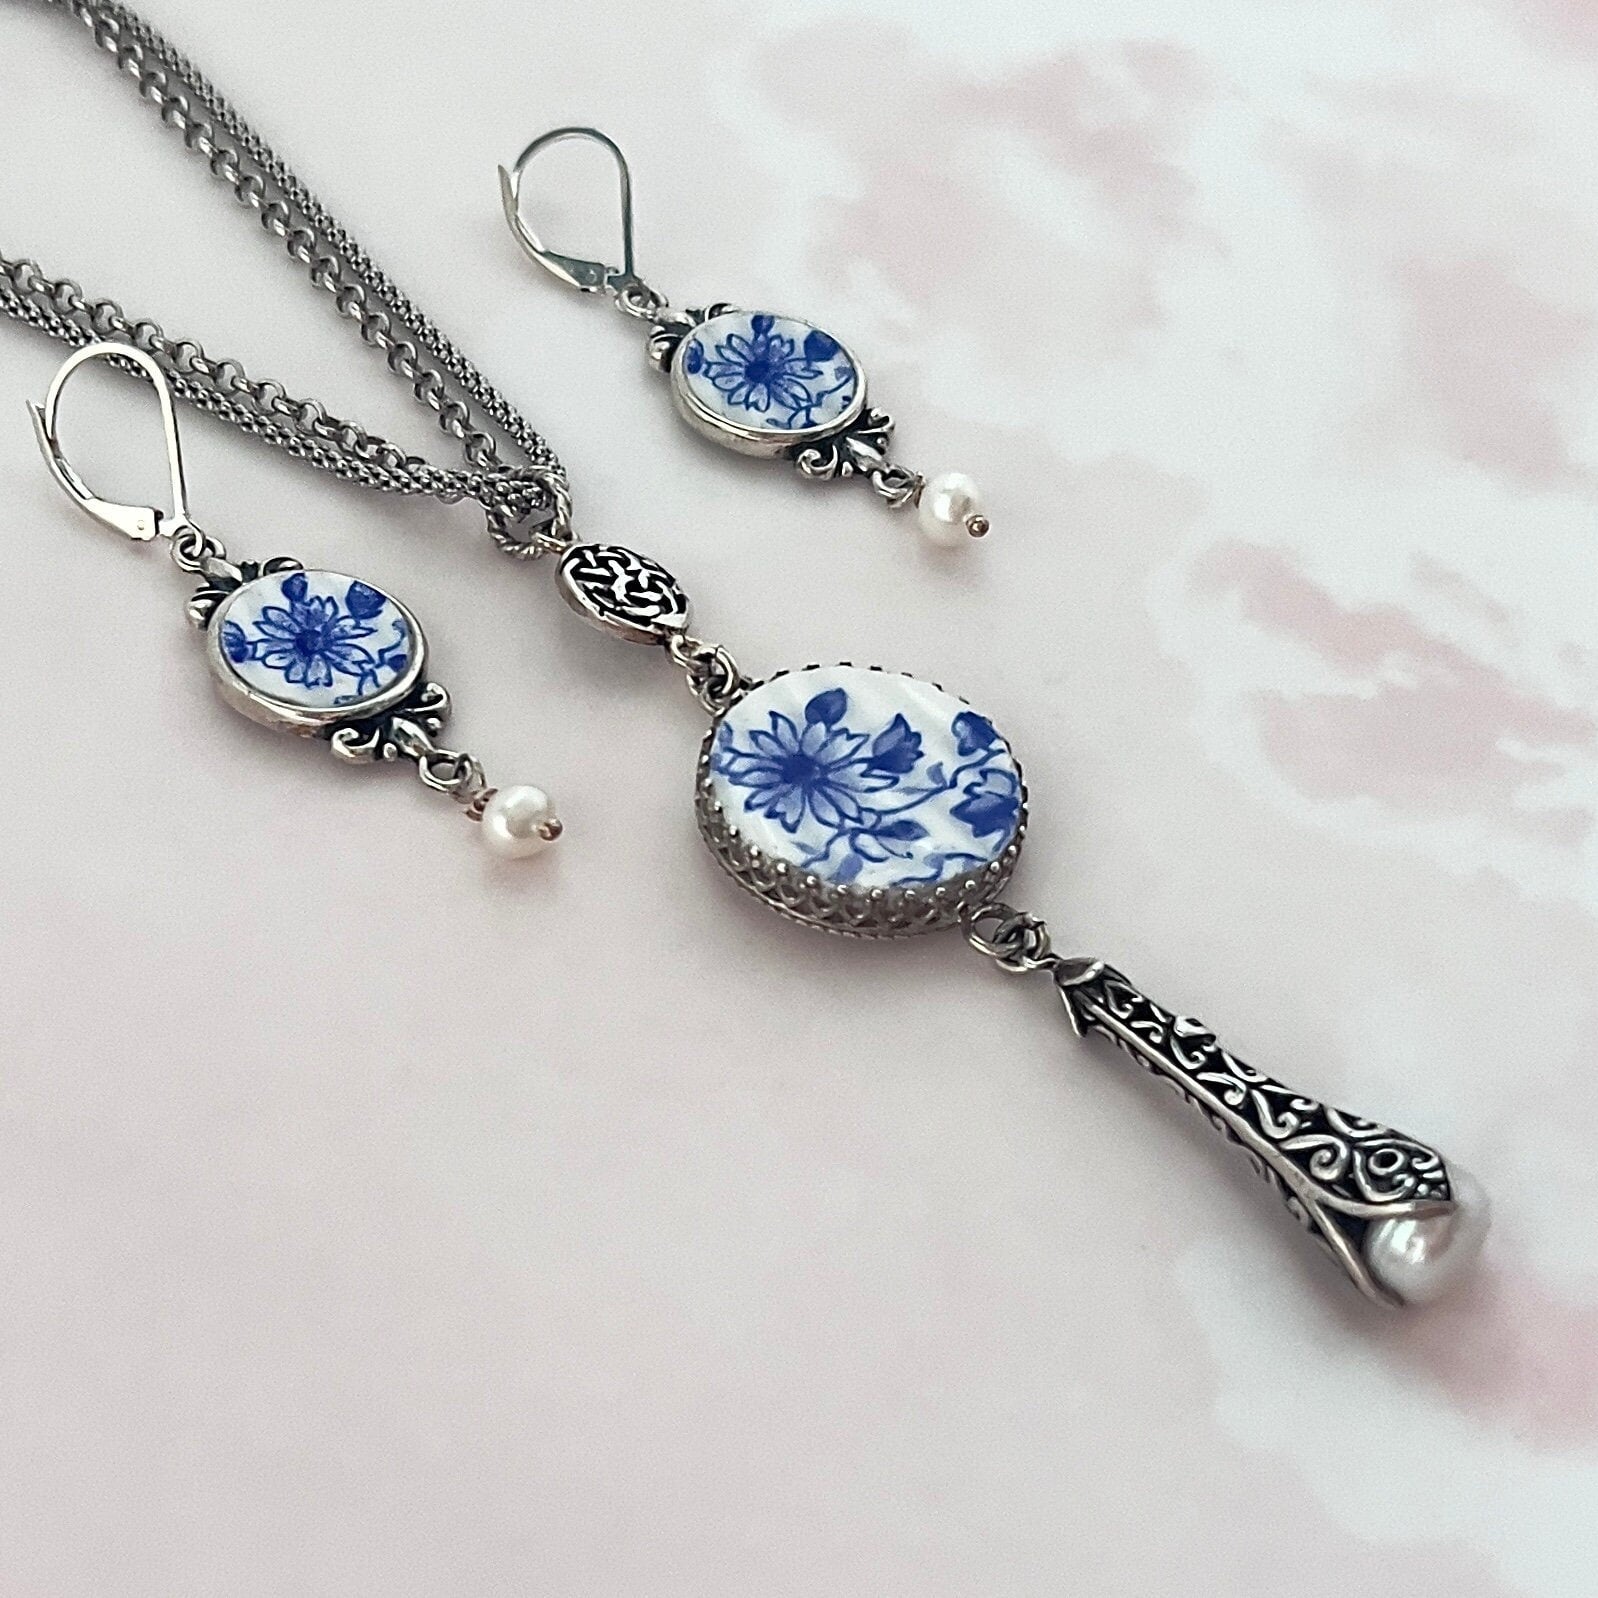 Unique 20th Anniversary Gift for Wife, Broken China Jewelry, Shelley Dainty Blue Victorian Jewelry